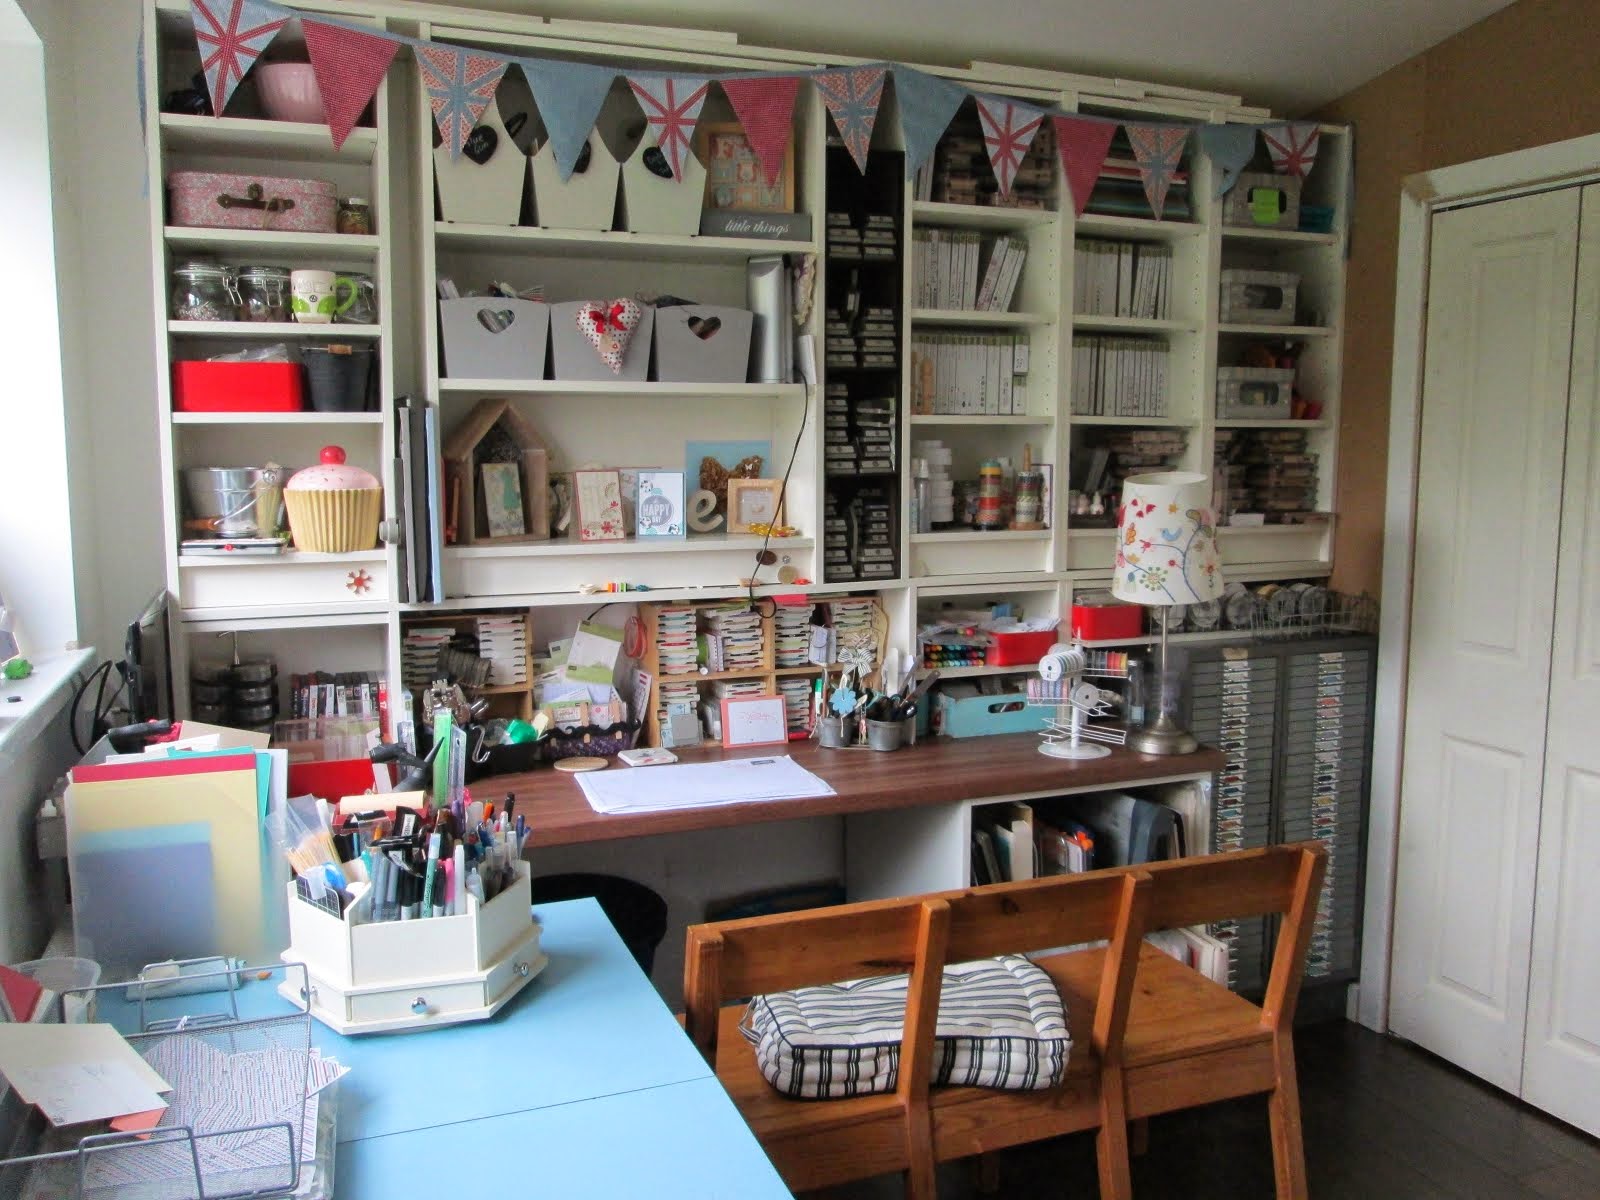 Take a look around my Crafty Space!